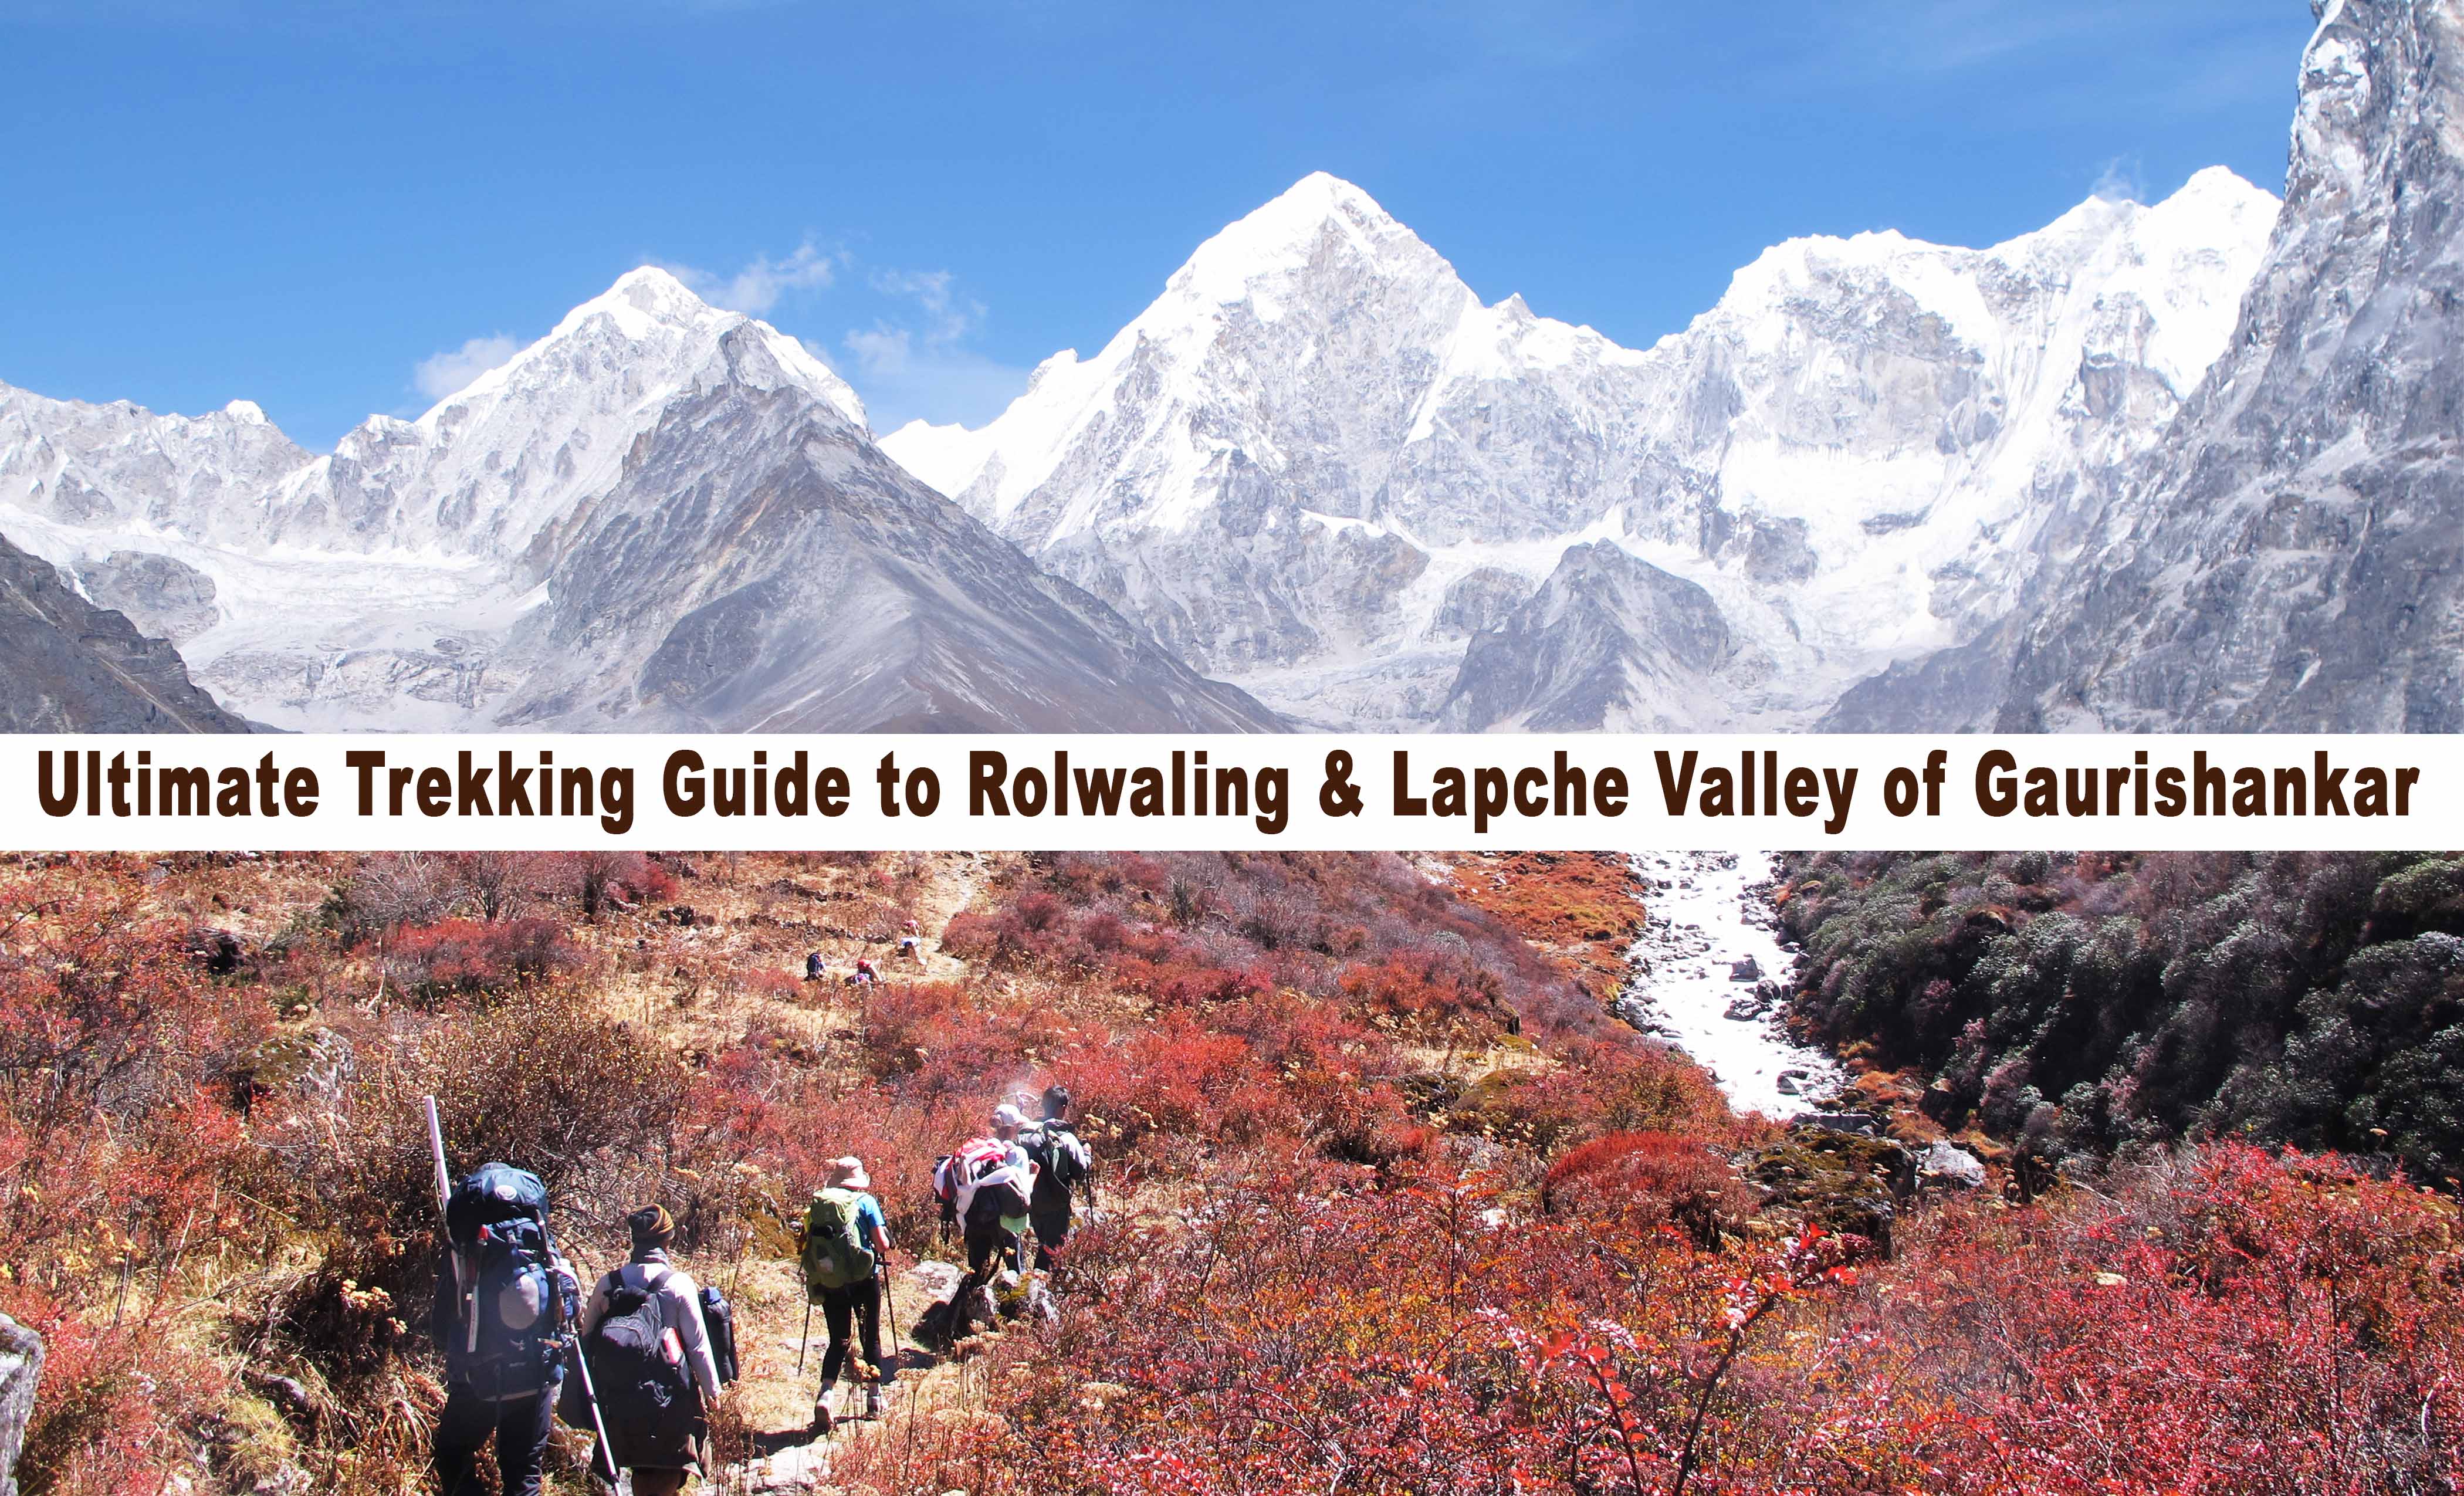 Tips and Essential Guide for Trekking in Rolwaling and Lapche valley of Gaurishankar Area